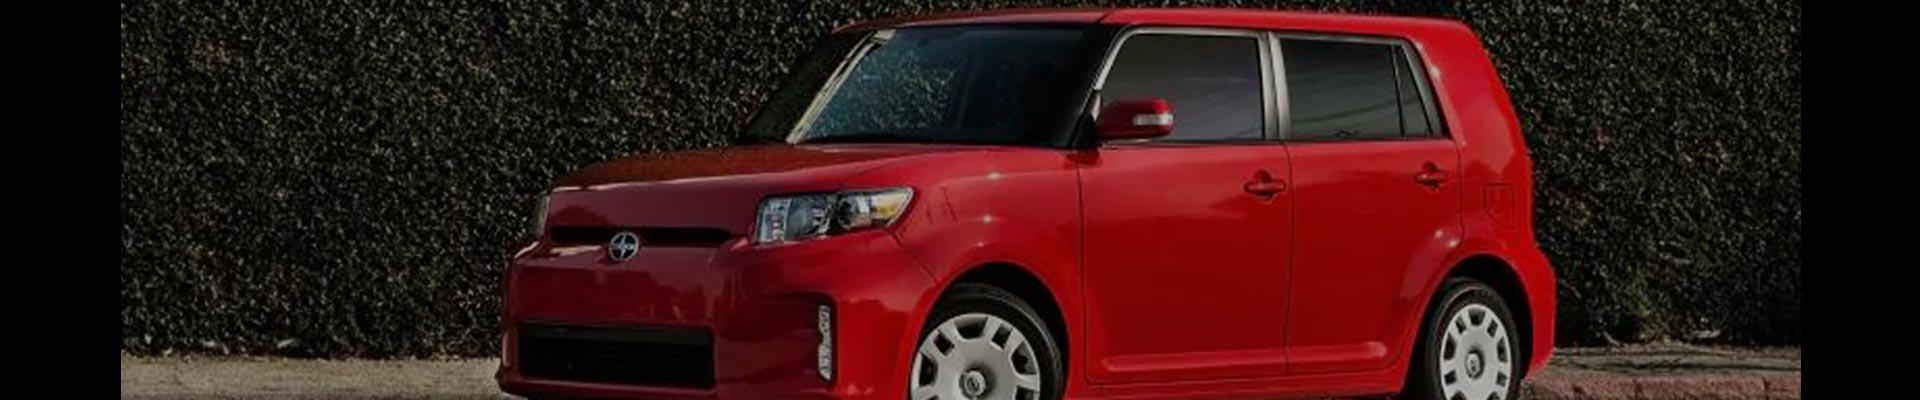 Shop Replacement and OEM 2005 Scion xB Parts with Discounted Price on the Net